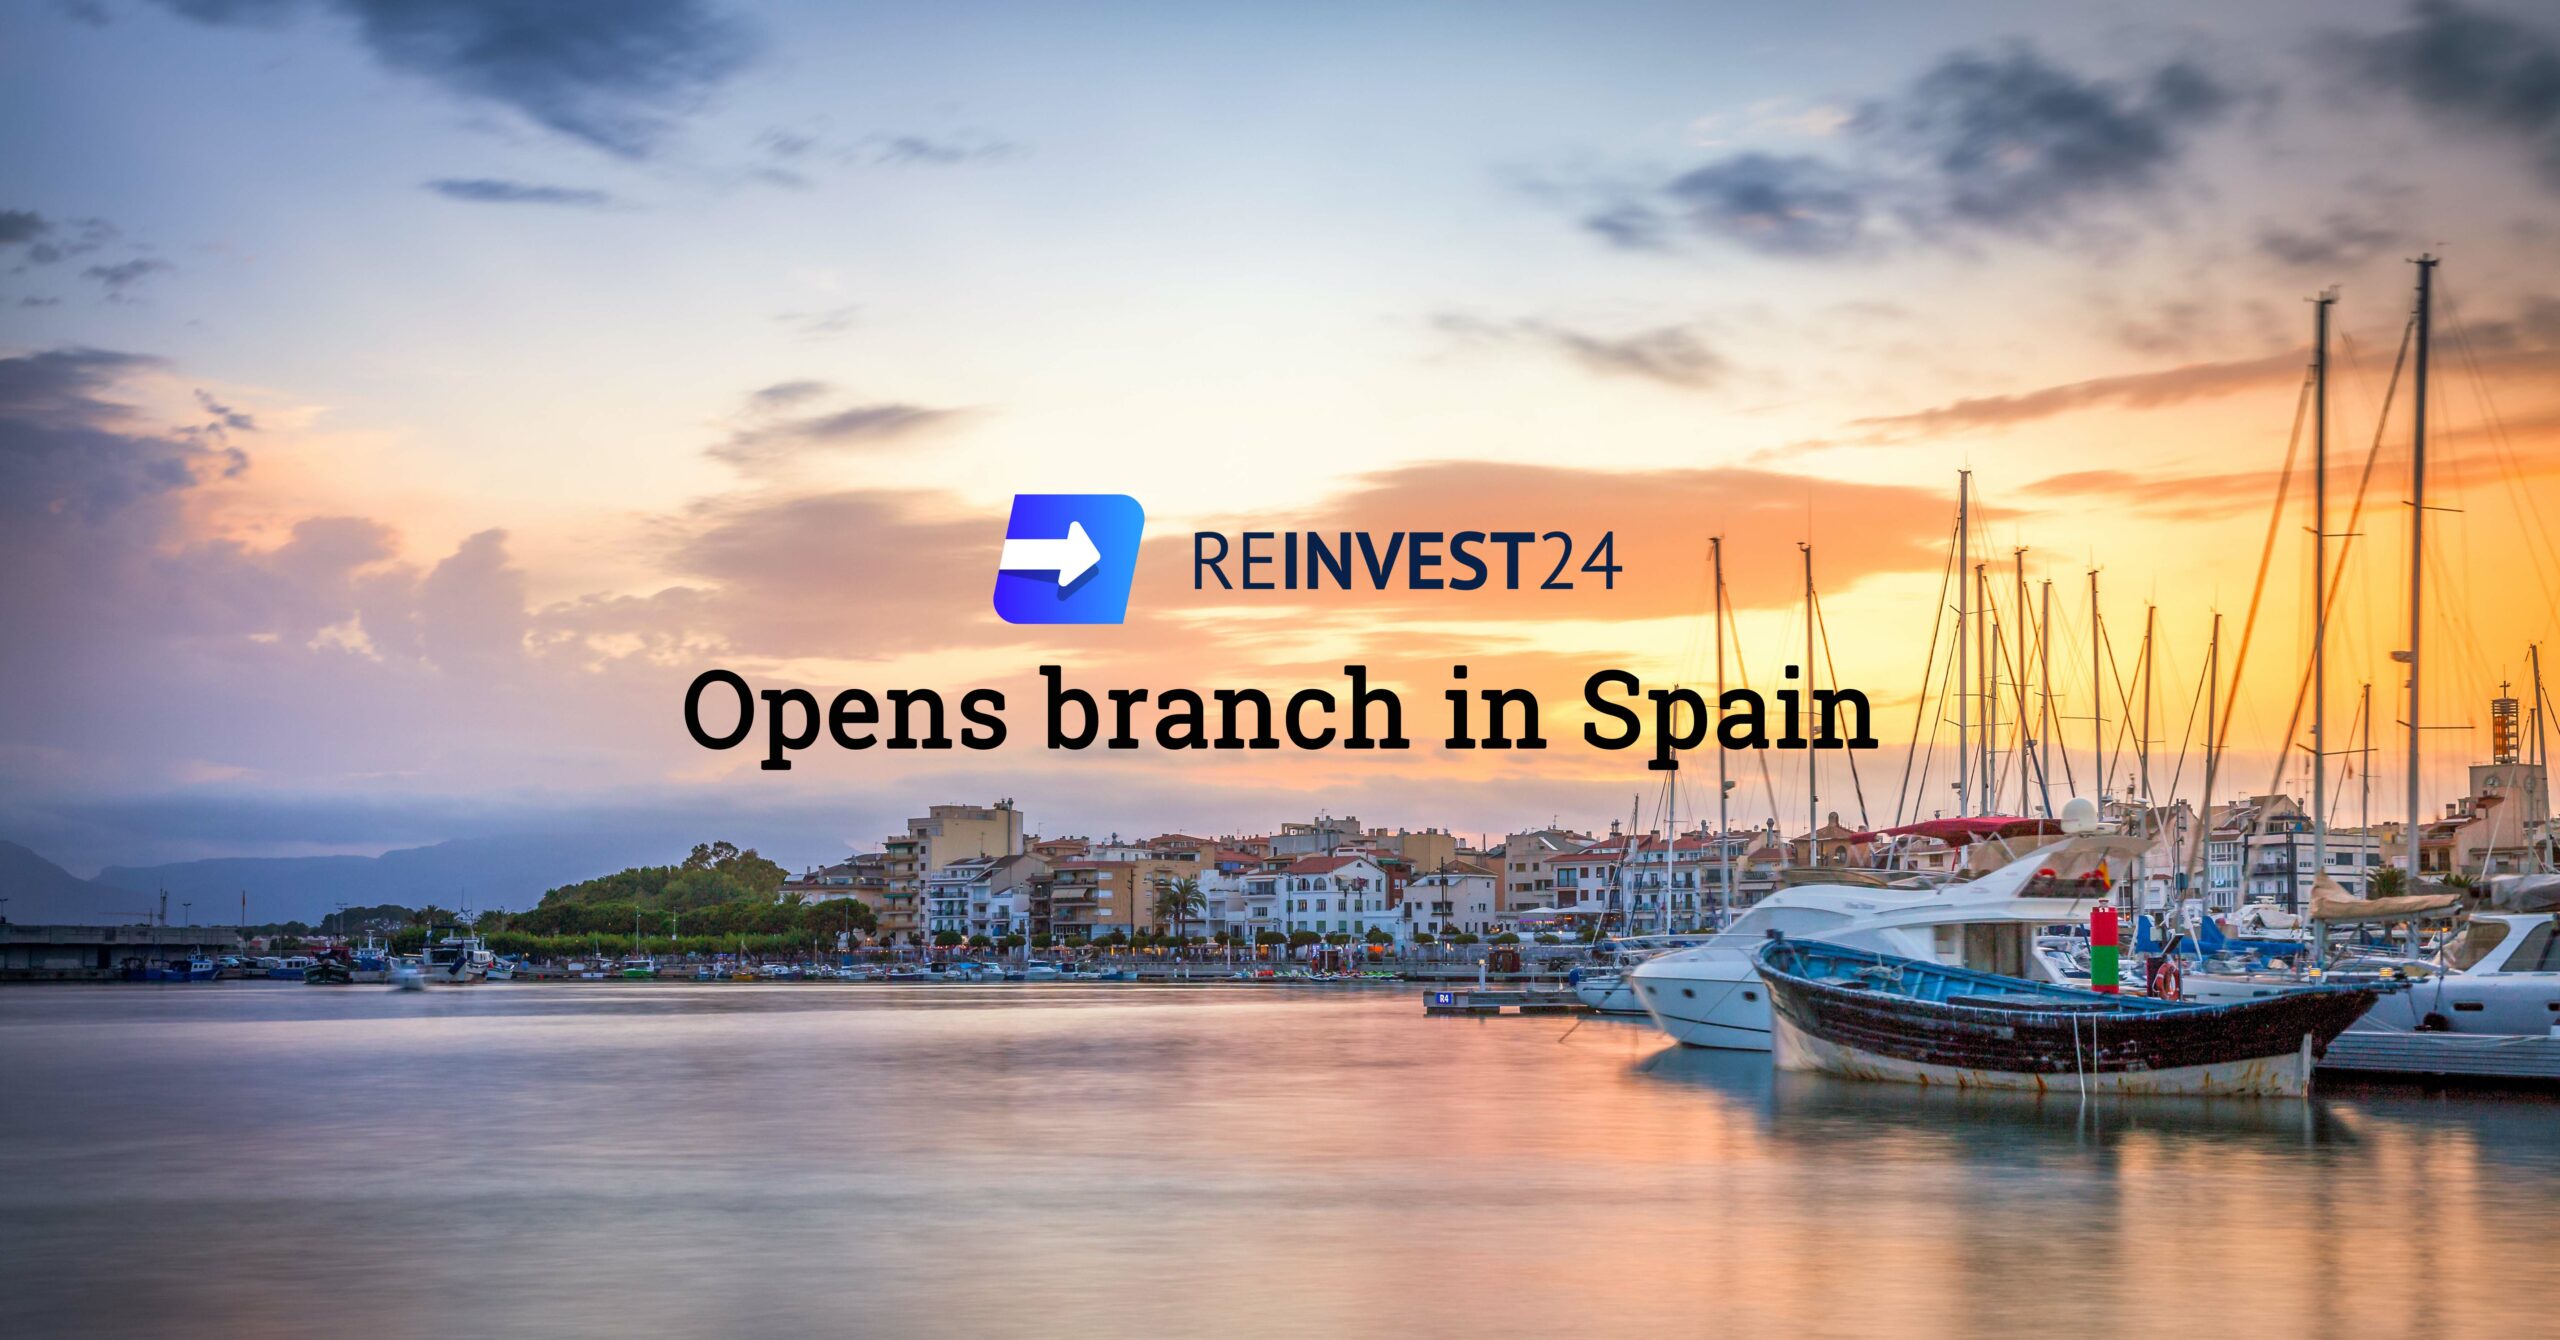 Reinvest24 opens branch in Spain